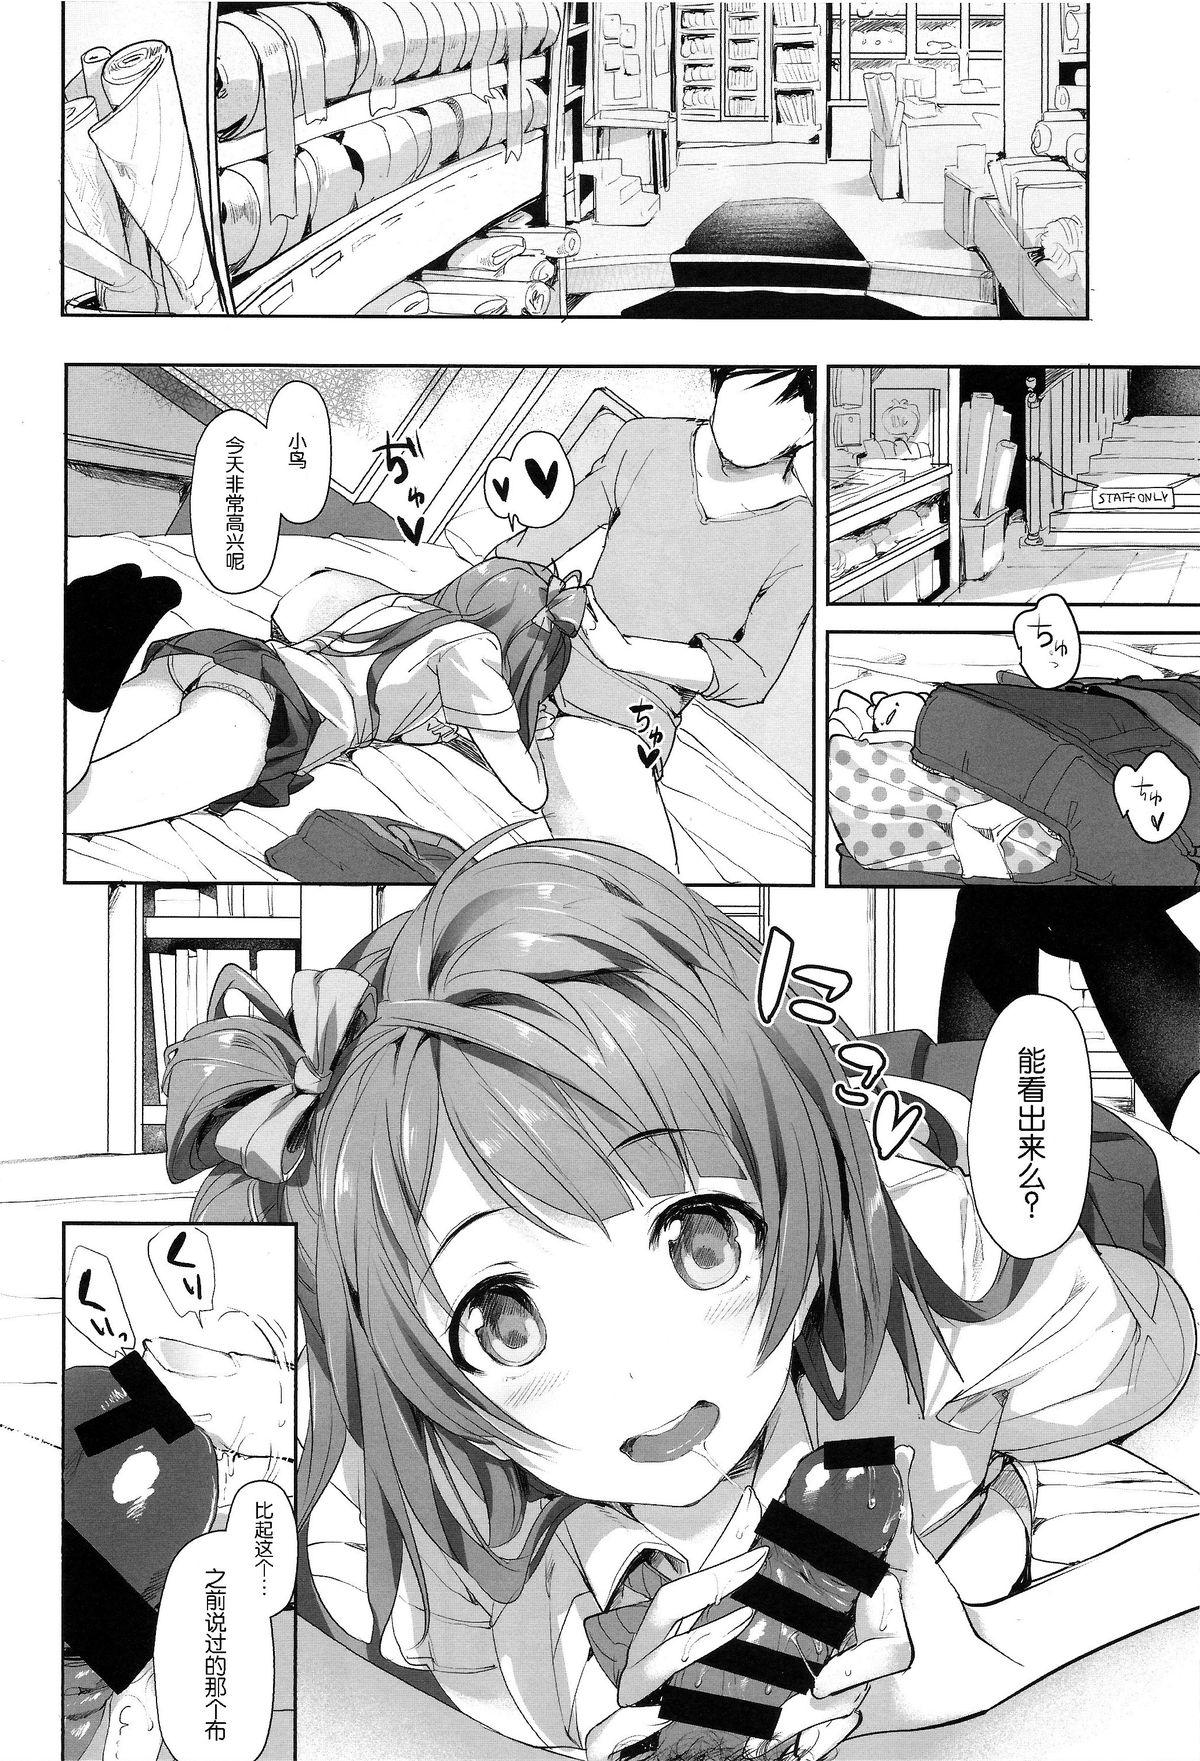 Mature Woman UR THE BEST! - Love live Stepmother - Page 4